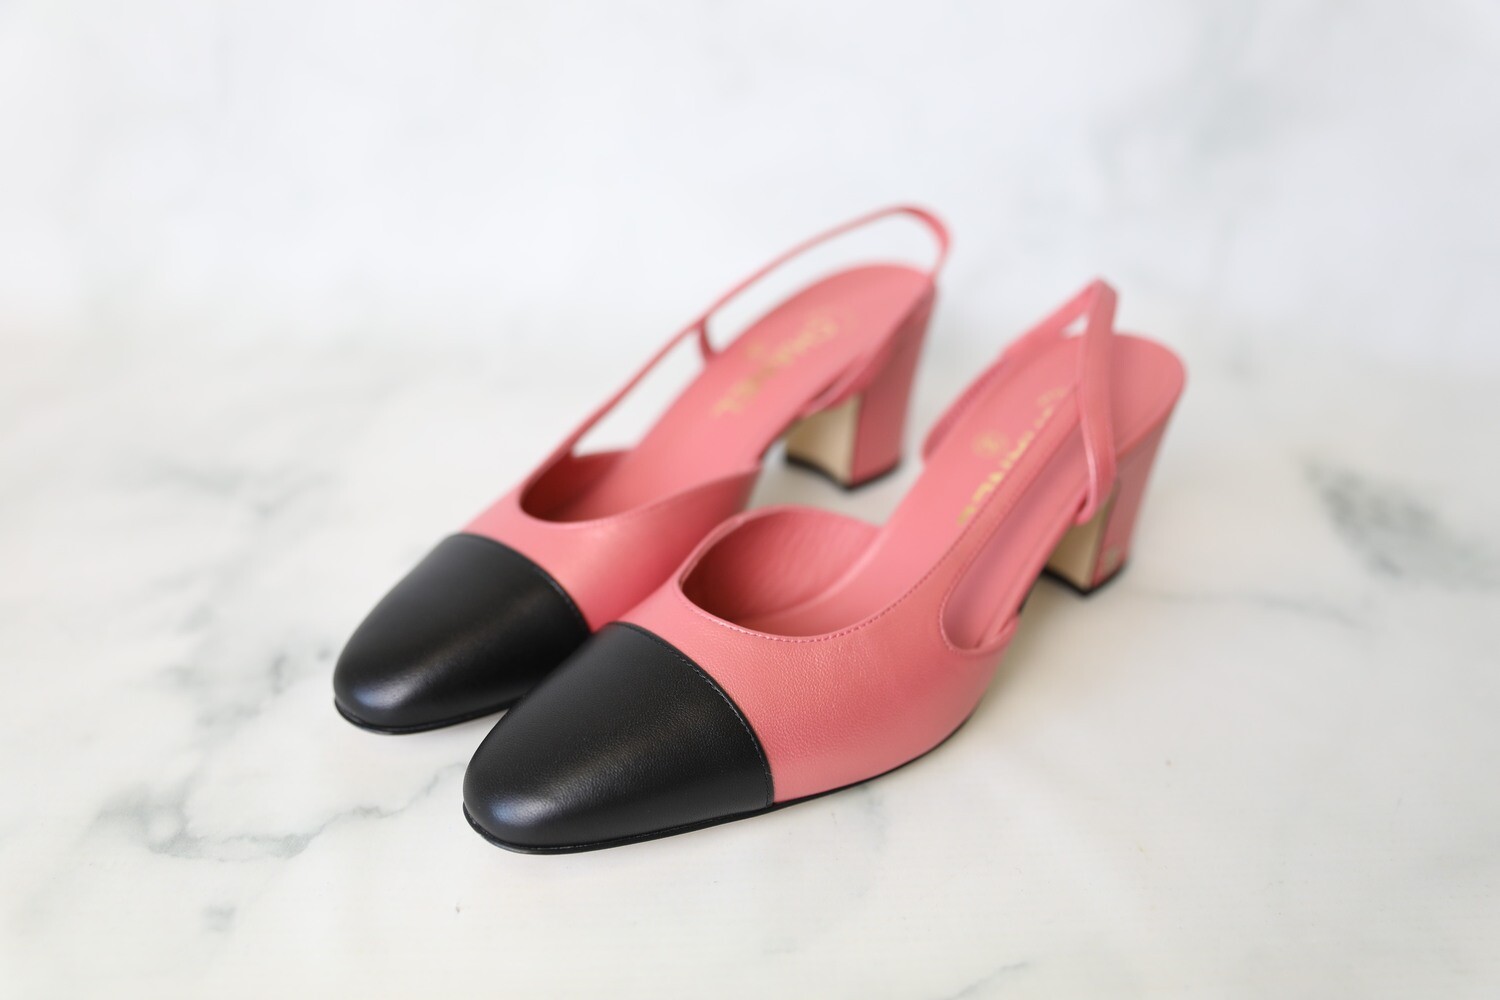 Chanel Slingback Pumps, Mid Heel, Pink and Black. Size 39.5, New